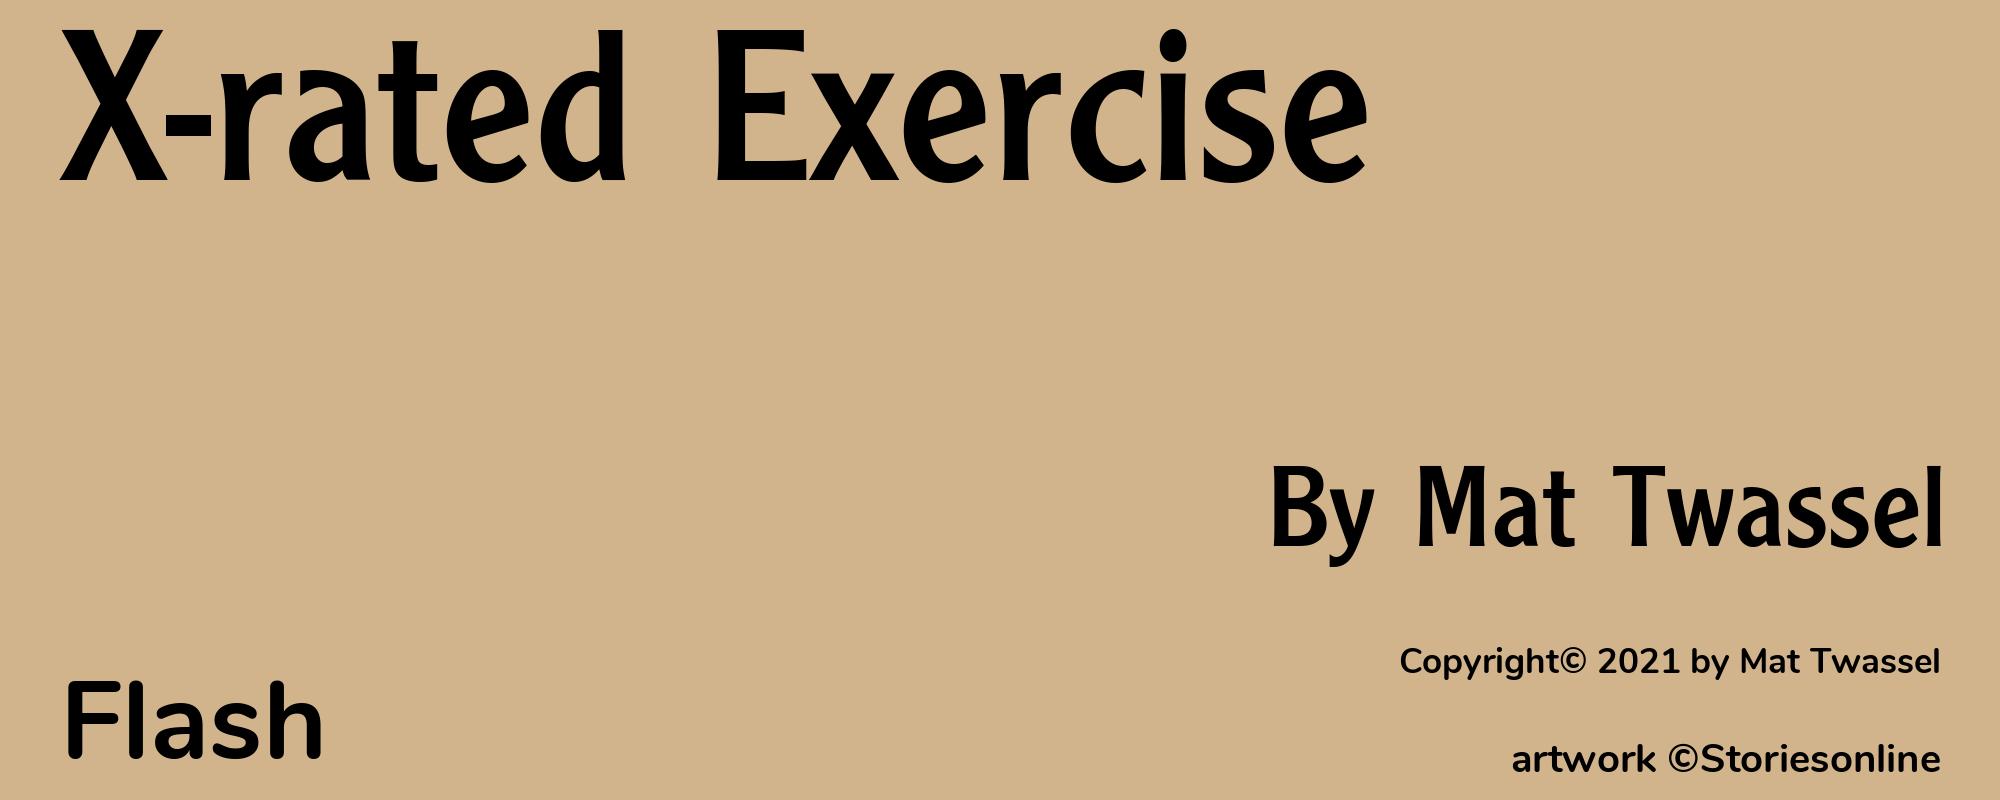 X-rated Exercise - Cover